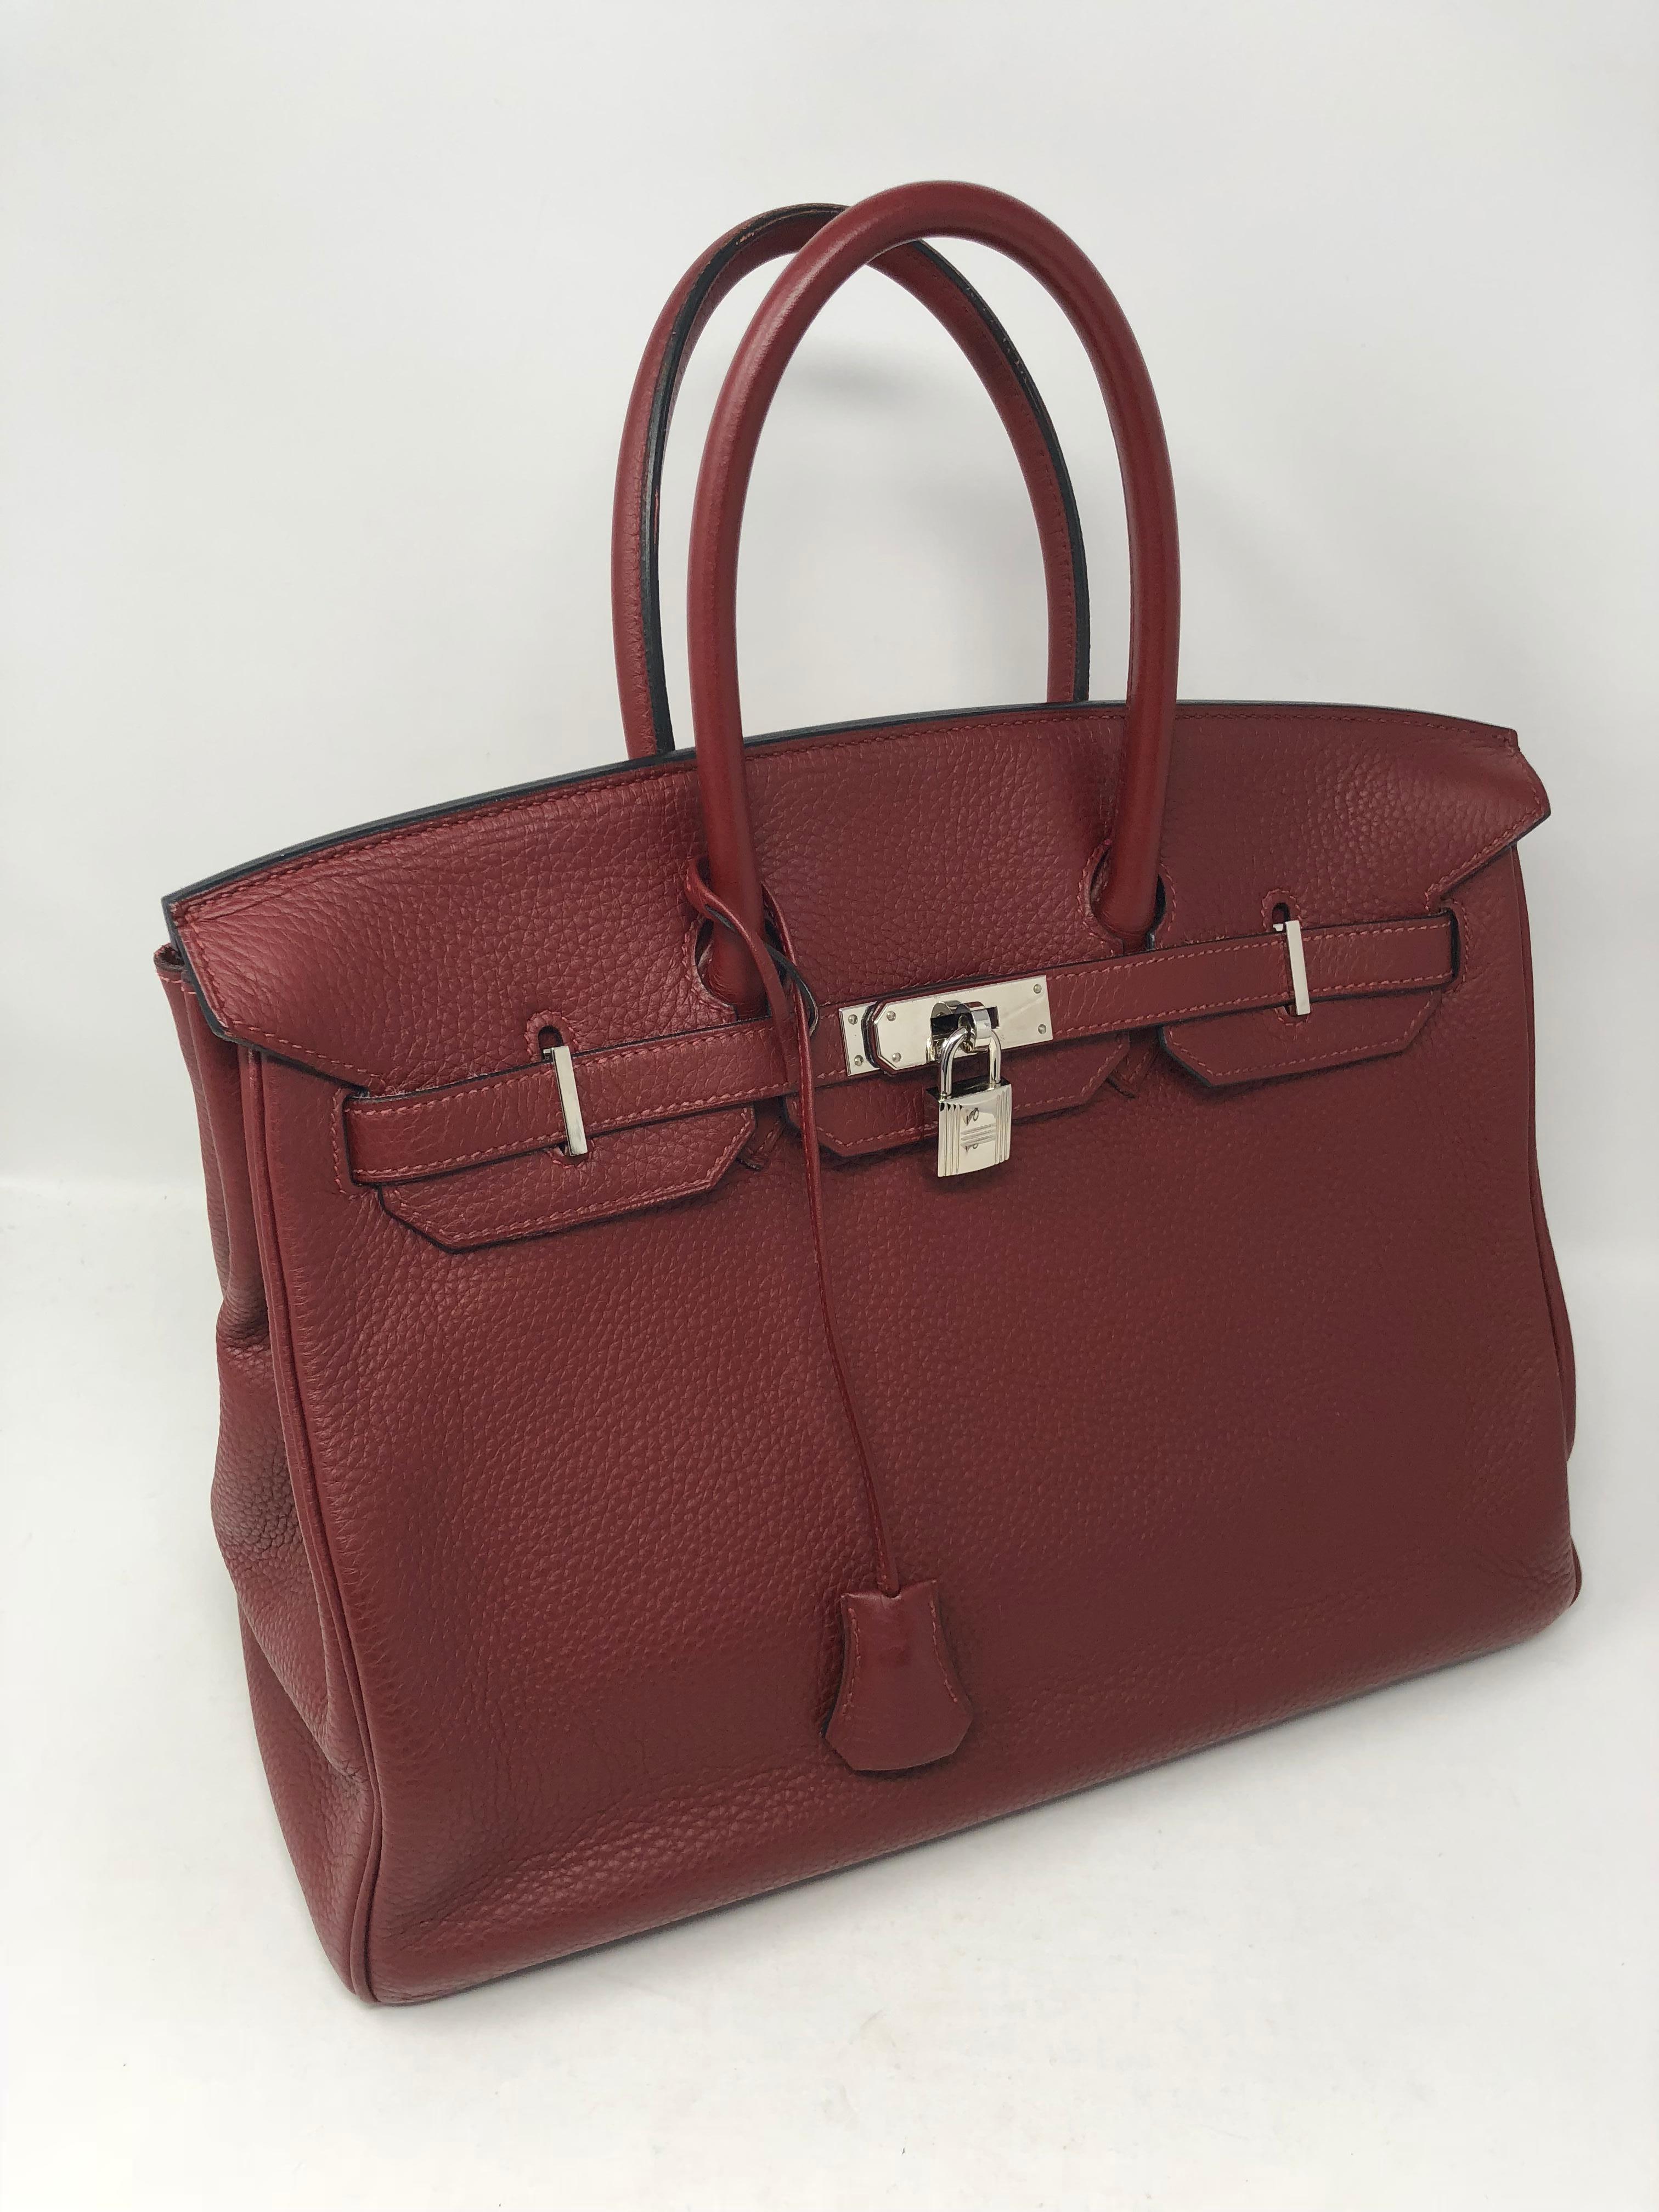 Hermes Birkin 35 in Burgundy color from 2008 L square.  Palladium hardware in good condition. Comes with lock, clochette, and keys. Deep burgundy color that is a neutral compliment to most outfits. Guaranteed authentic. 